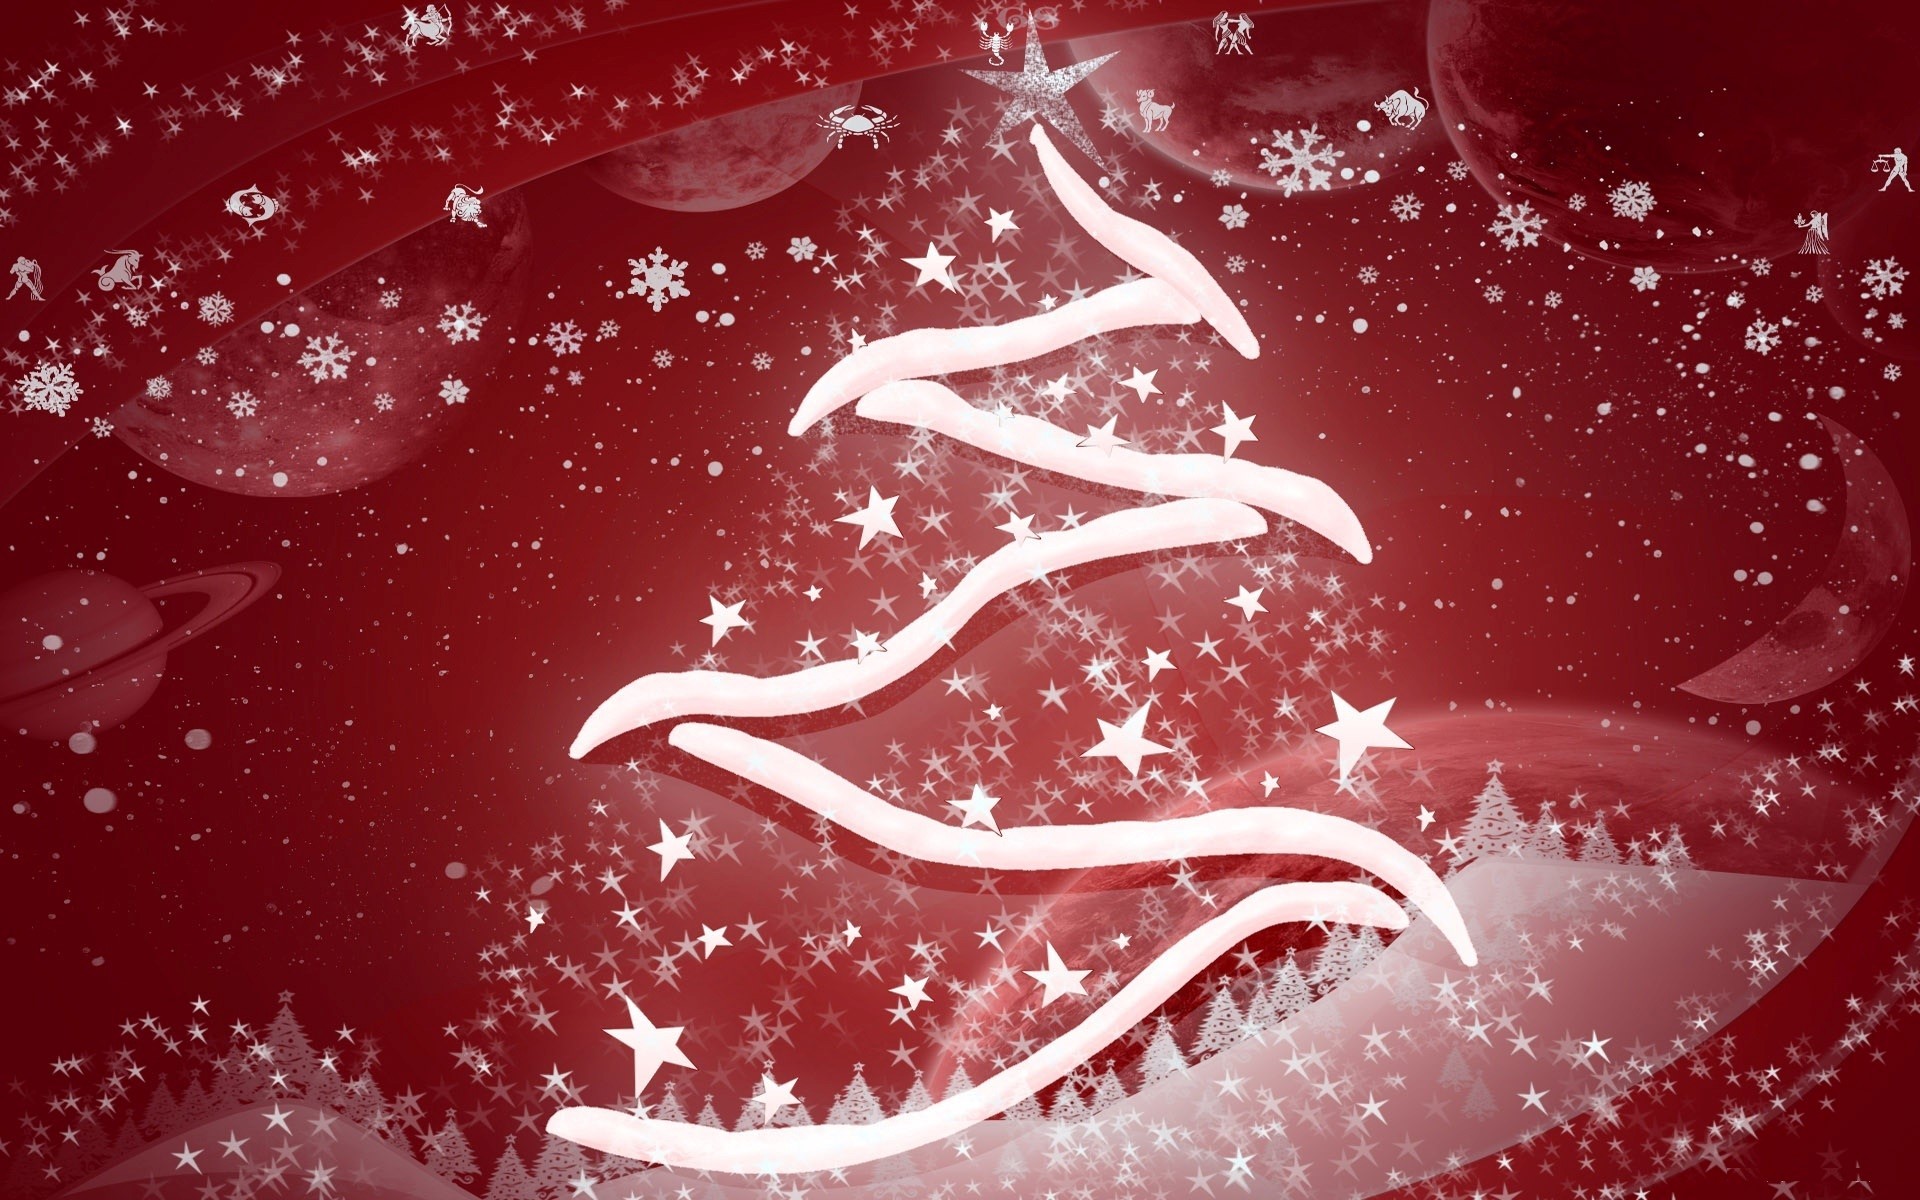 1920x1200 Amzing Snowy Christmas Tree Photo in Red Background HD Images